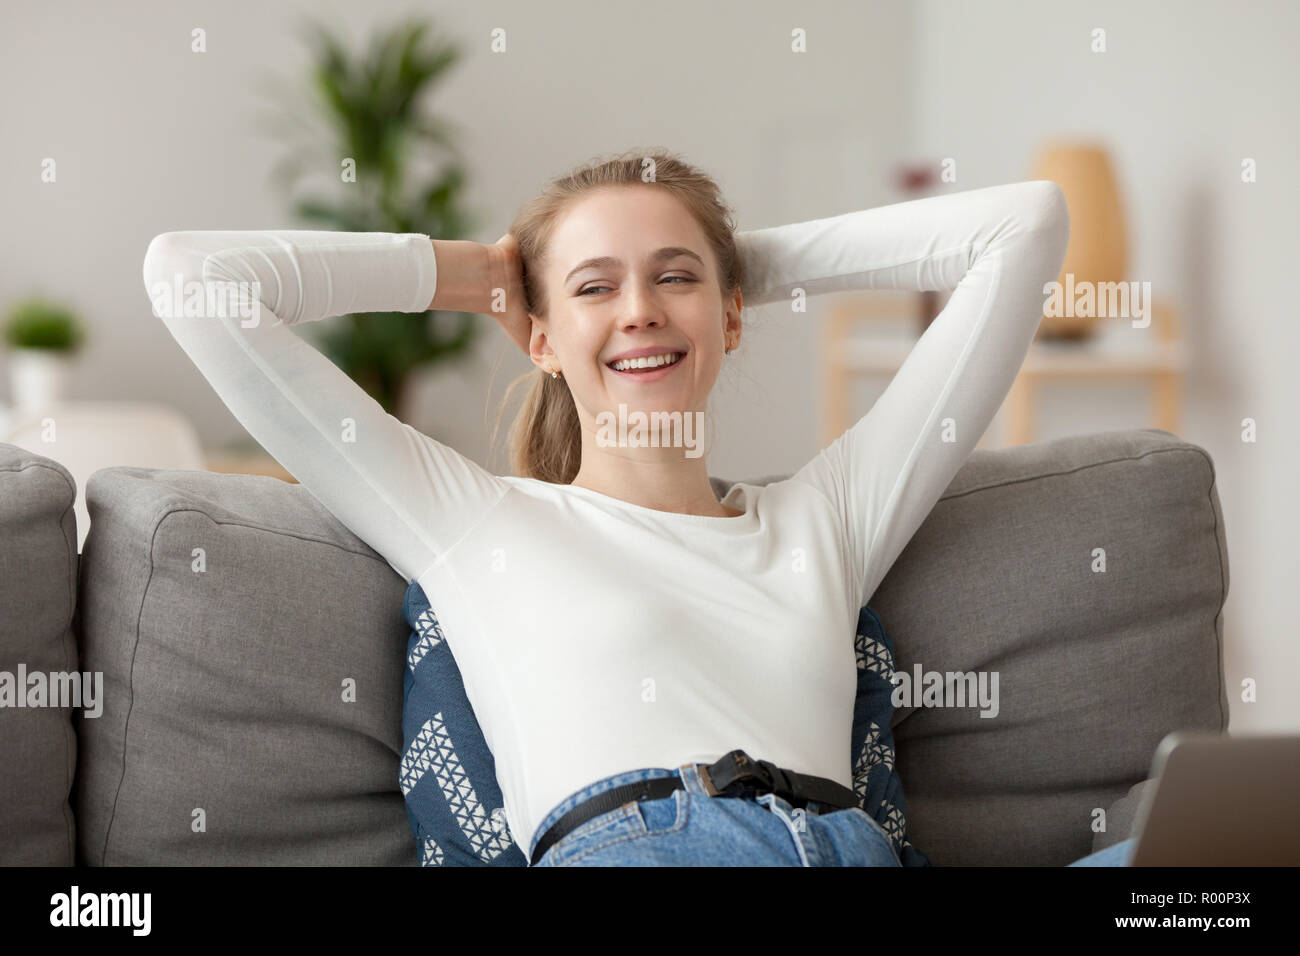 Pretty positive millennial woman relaxing at home Stock Photo